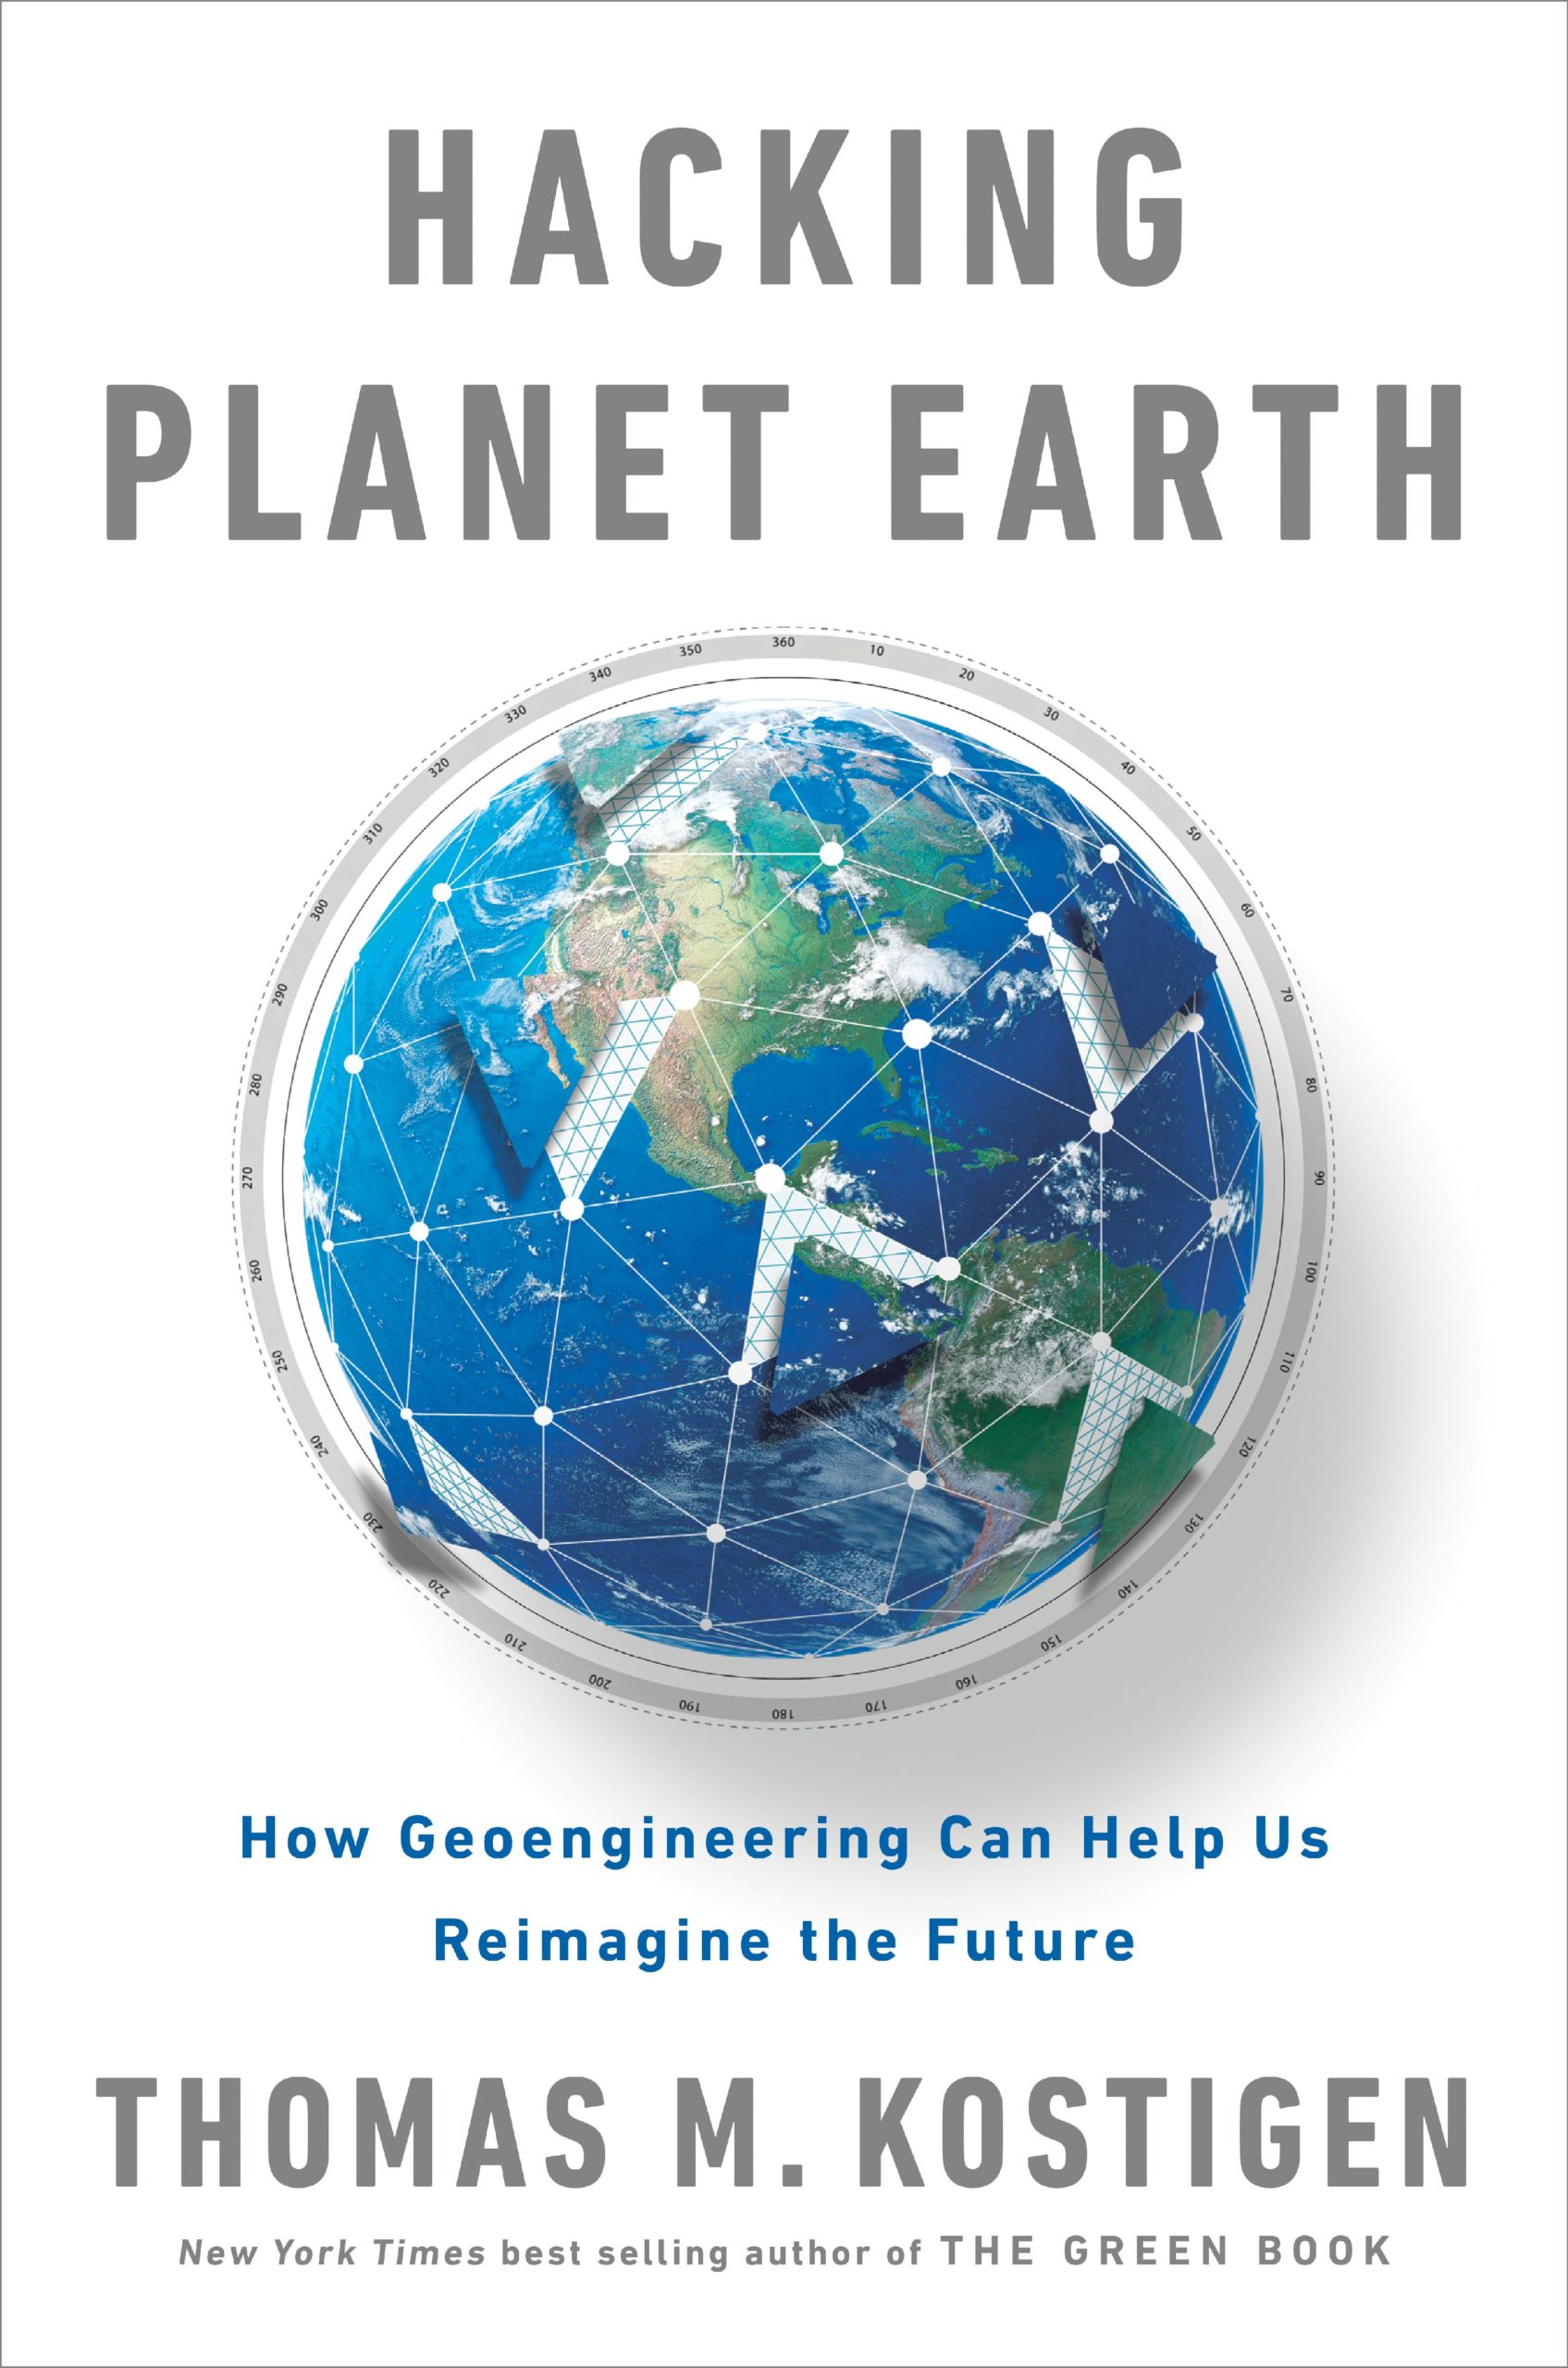 Hacking Planet Earth: How Geoengineering Can Help Us Reimagine the Future